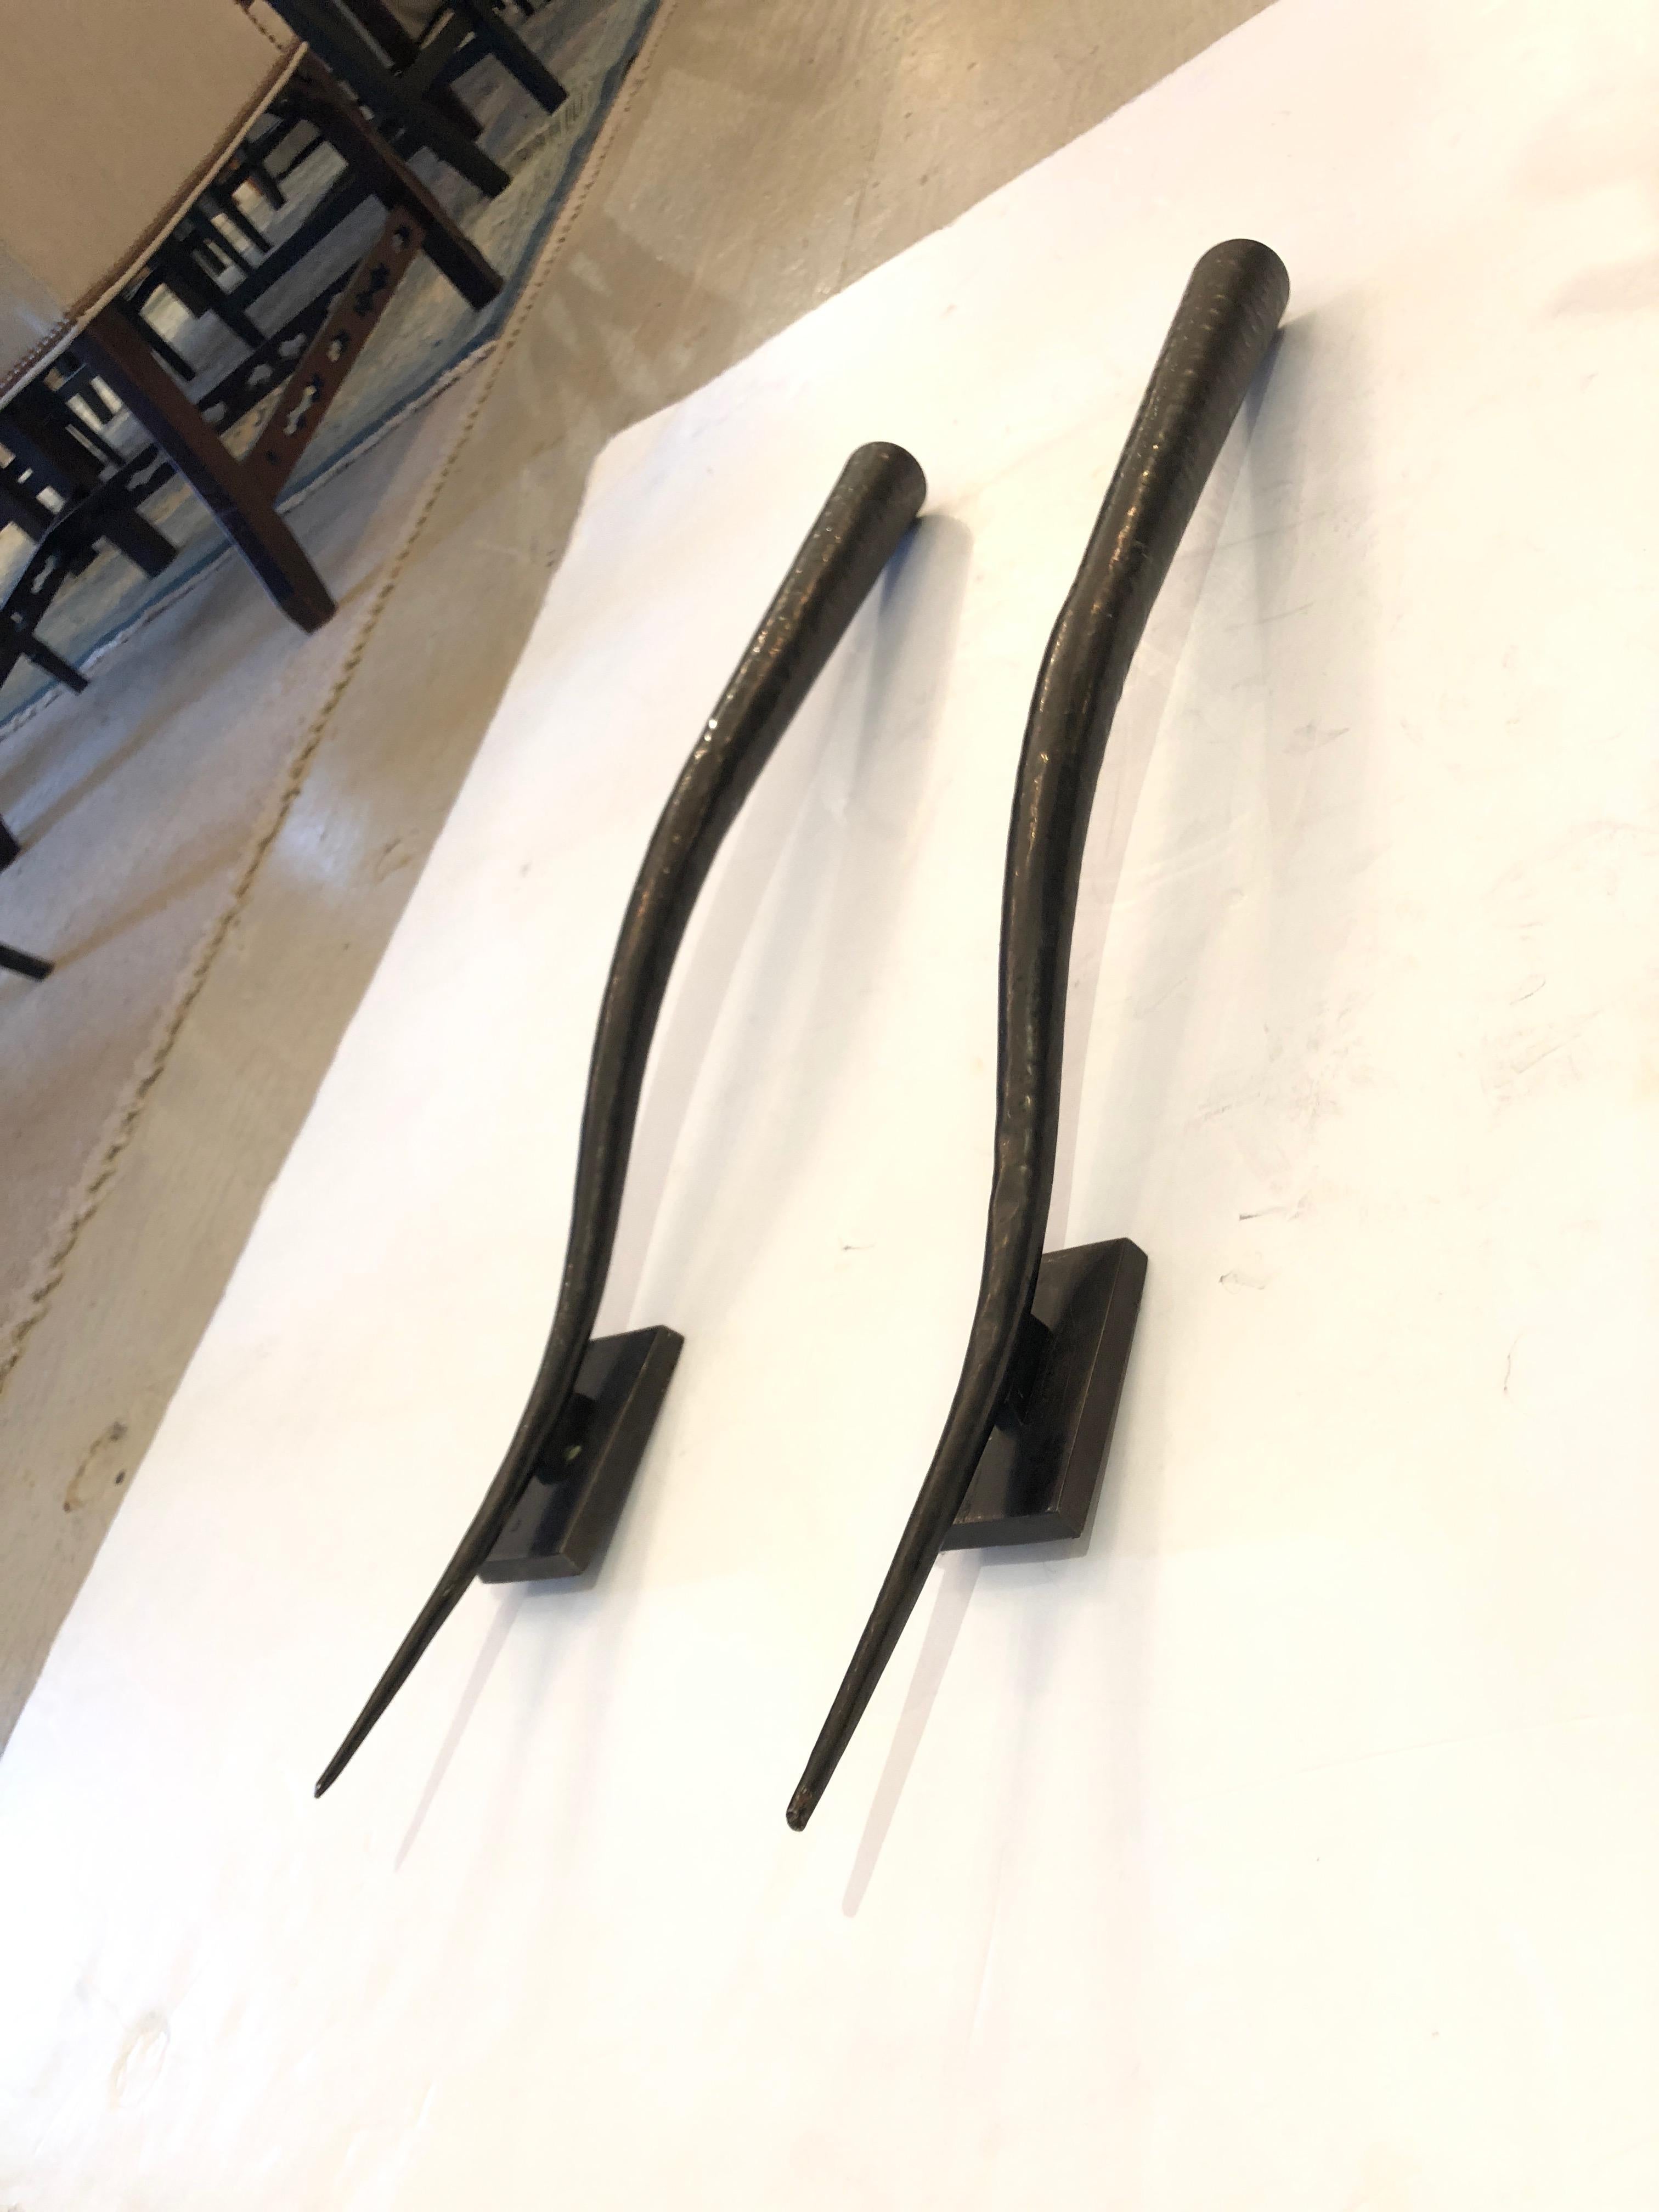 Very sophisticated sculptural pair of wall sconces that have an elongated horn or antler shape made out of dark bronze. They are meant to hold candles, but look like sculpture as they are. Could be electrified. Project 5 inches from the wall.